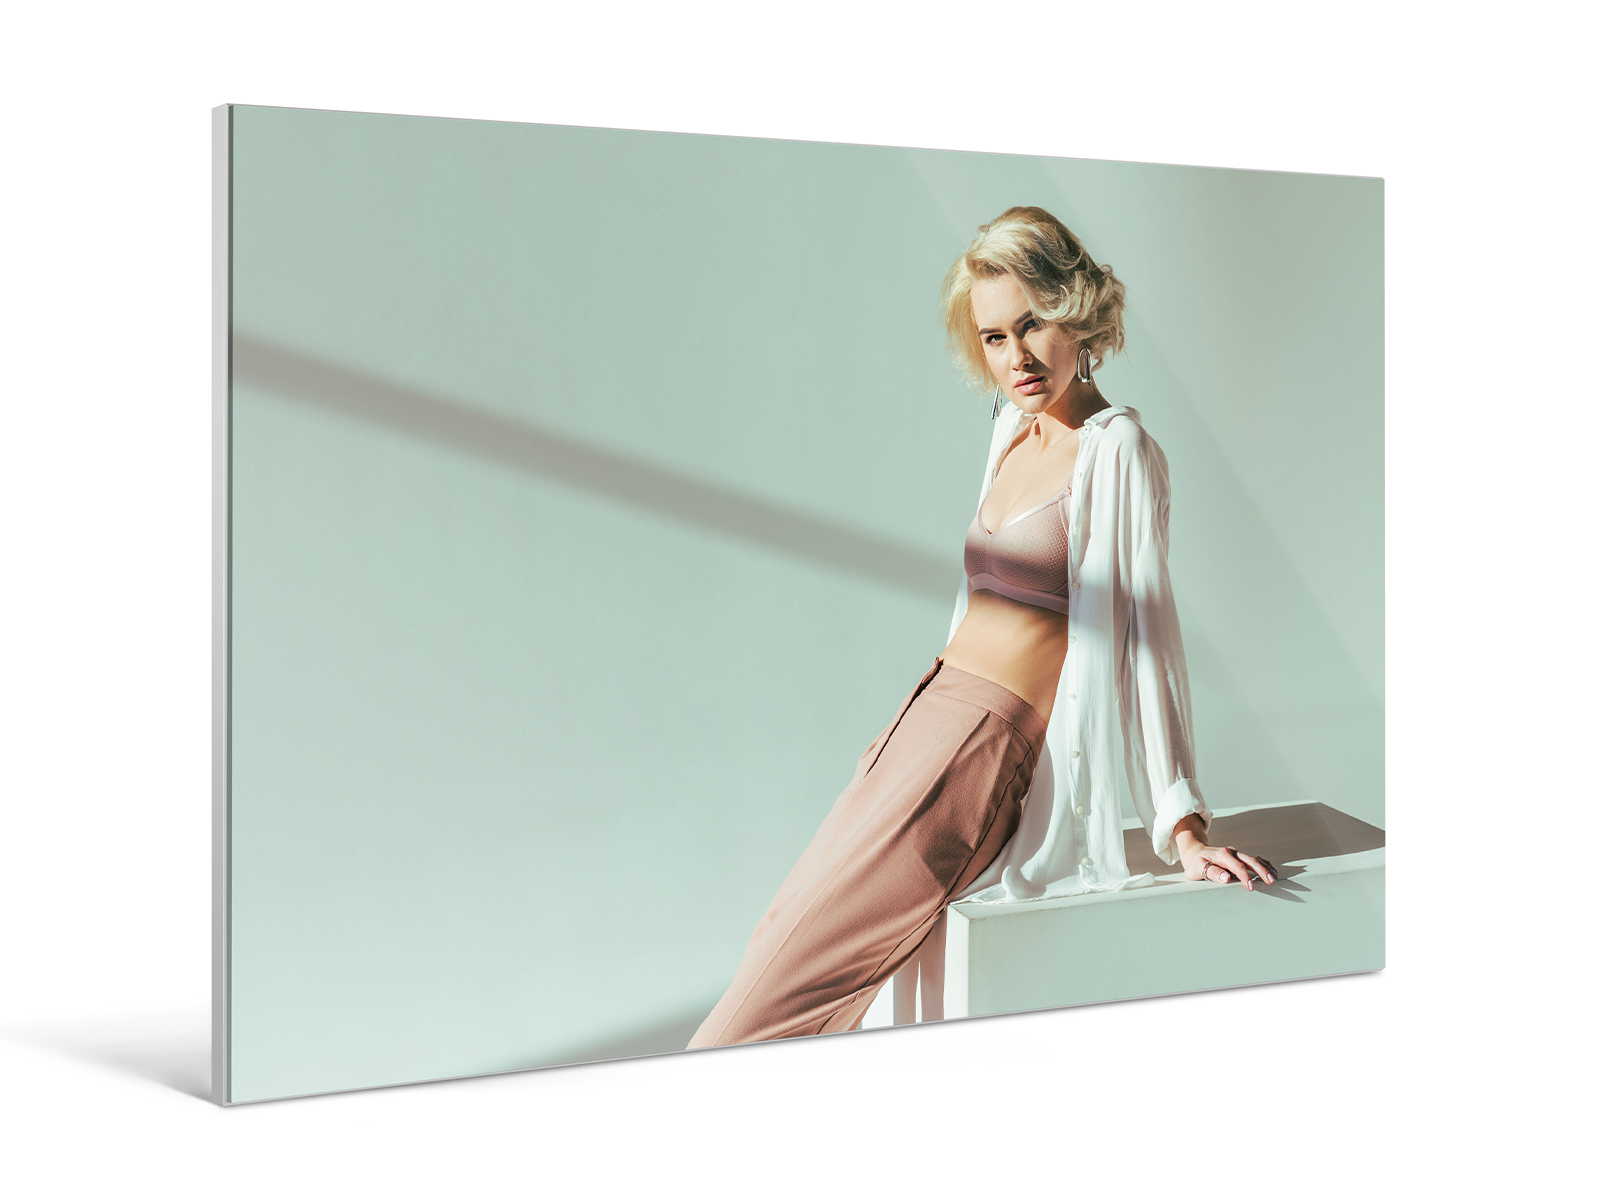 Portrait of a woman on an Acrylic Print With Slimline Case.